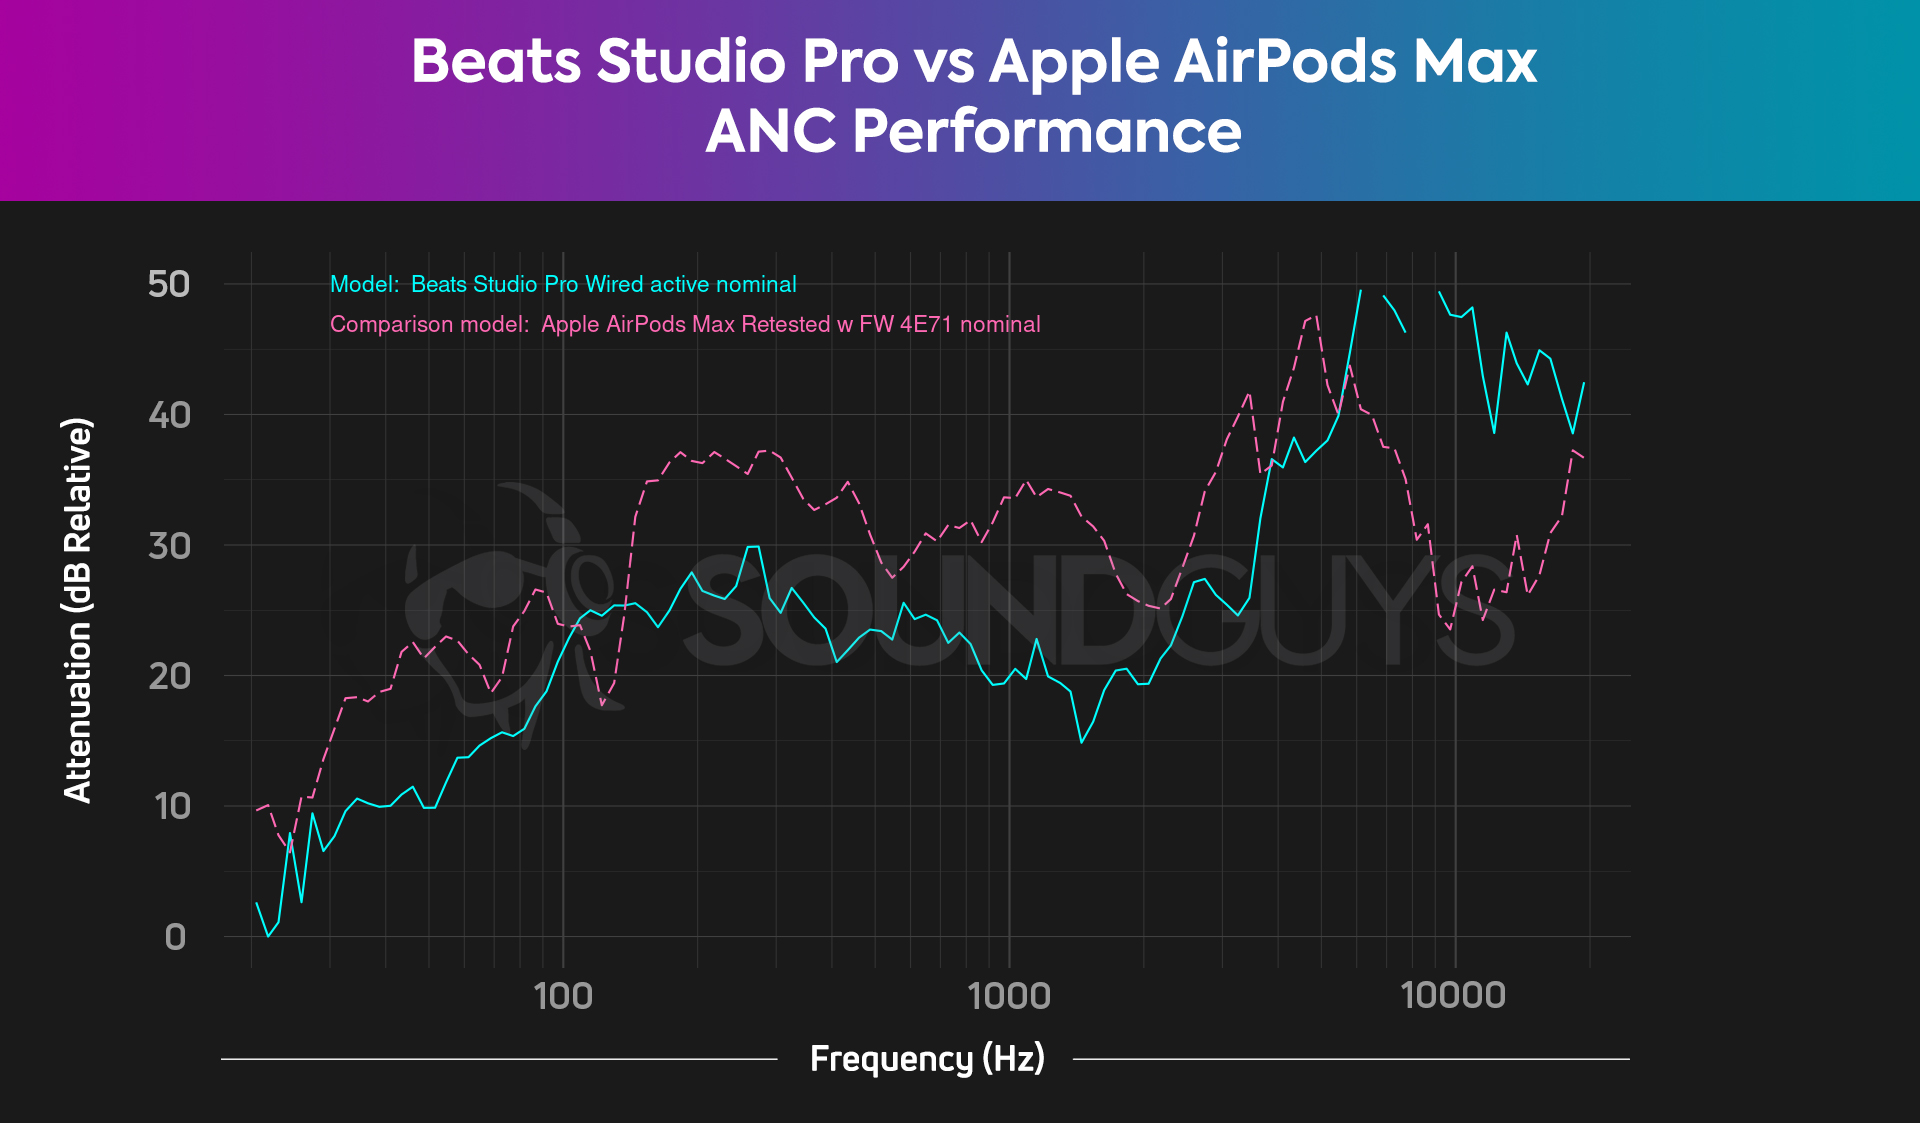 The Apple AirPods Max cancel noise much more effectively than the Beats Studio Pro.